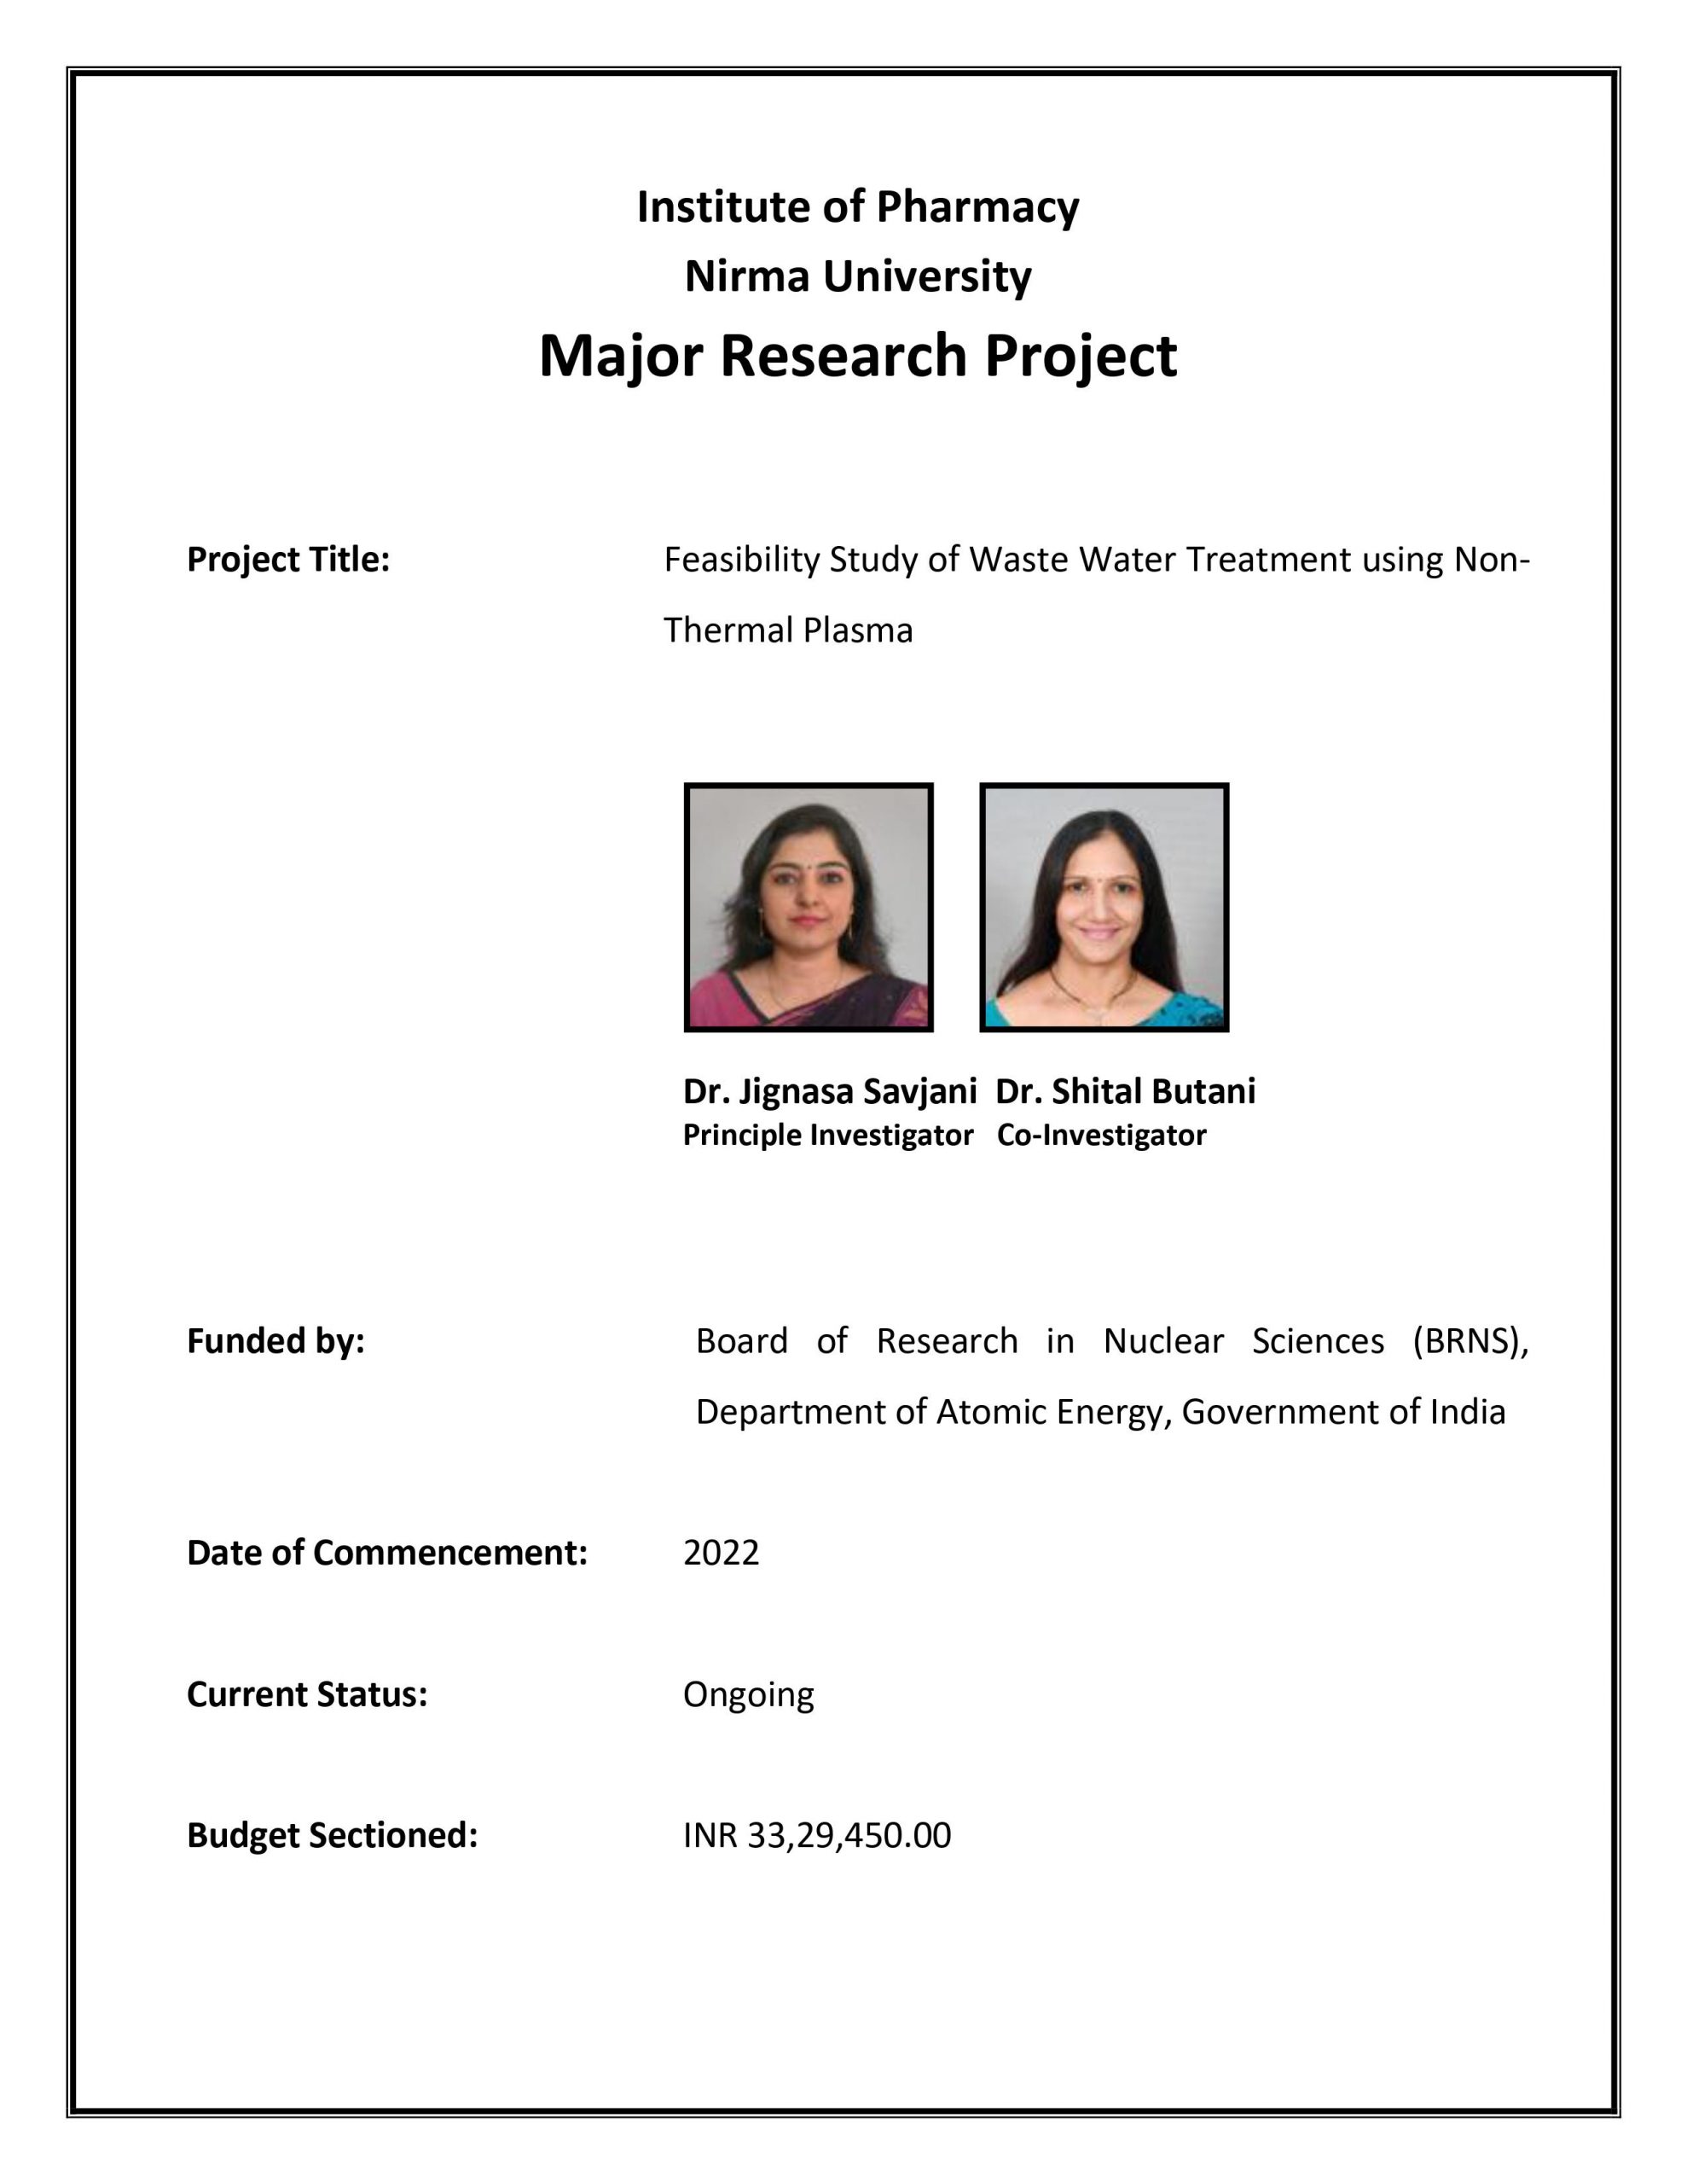 Feasibility Study of Waste Water Treatment using Non-Thermal Plasma